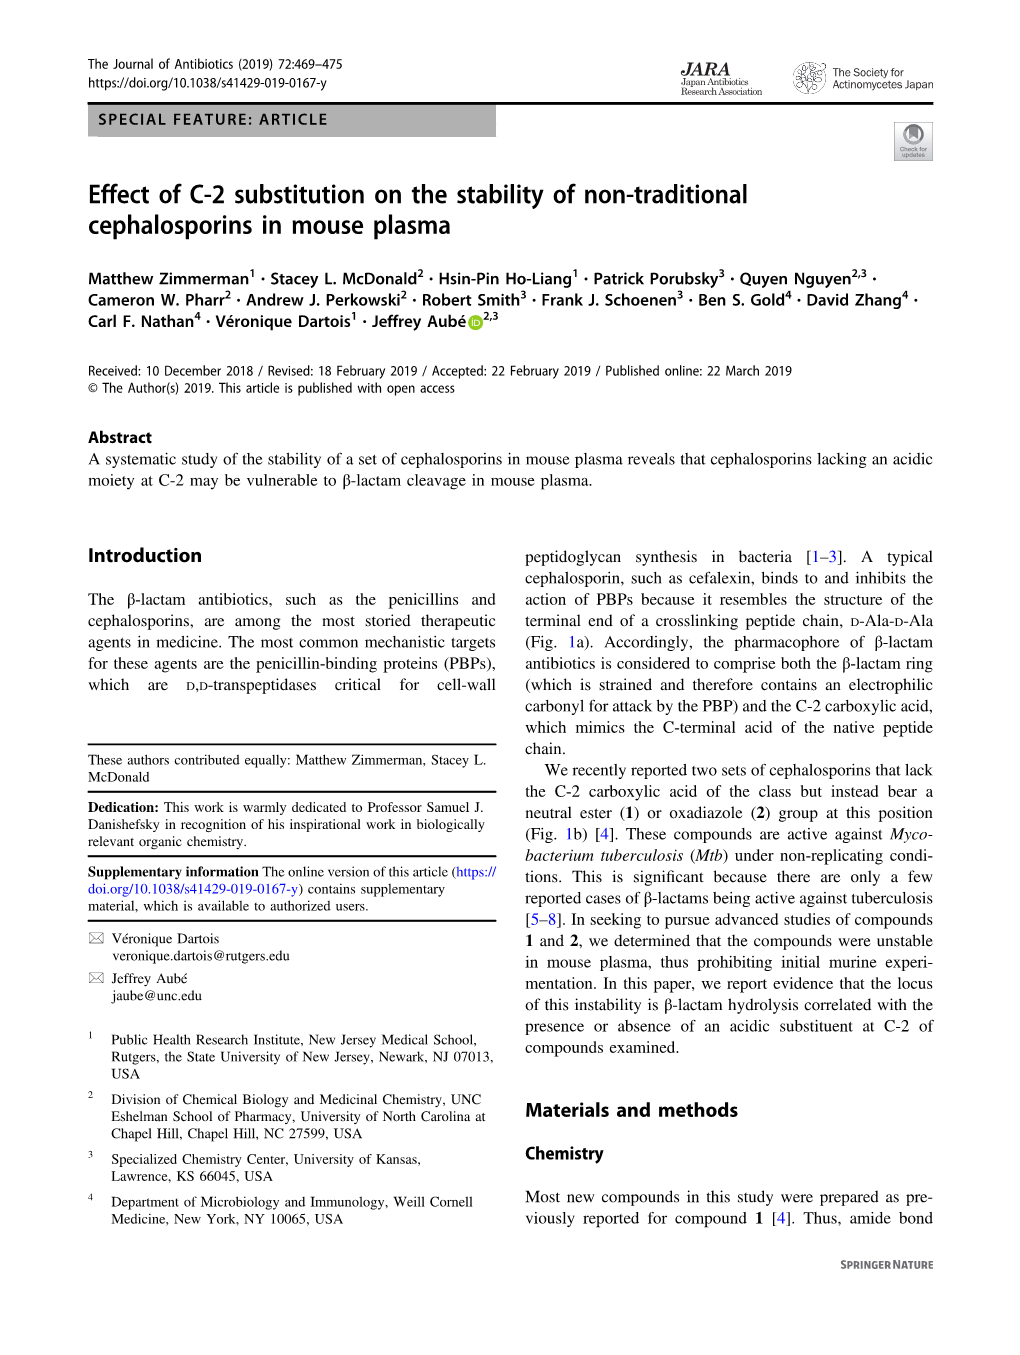 Effect of C-2 Substitution on the Stability of Non-Traditional Cephalosporins in Mouse Plasma